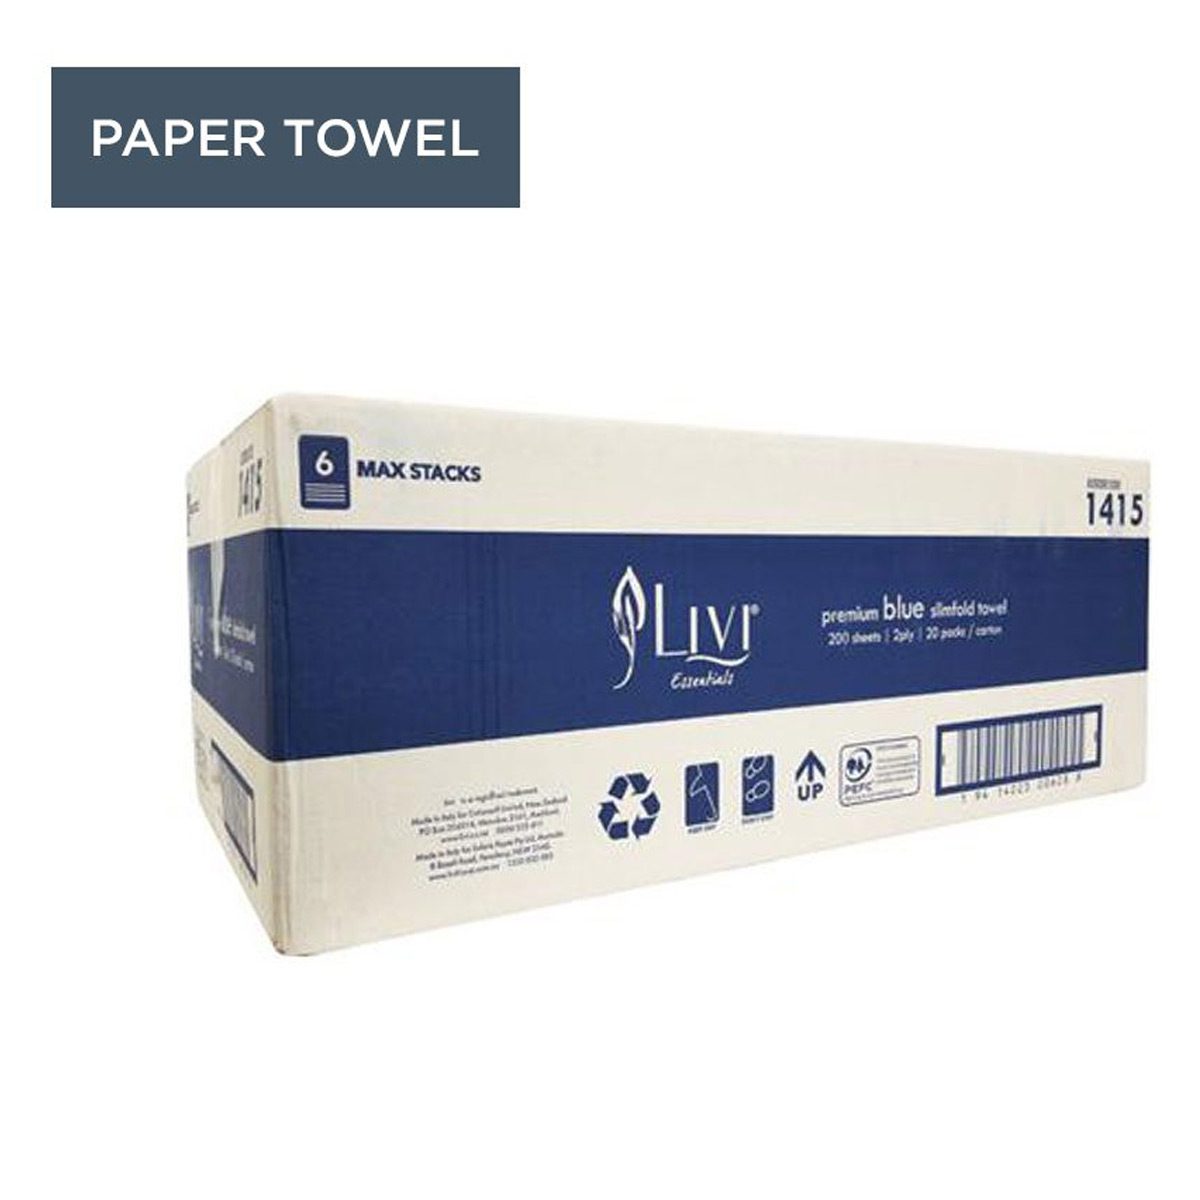 paper-products-paper-towels-livi-blue-slimfold-towel-livi-essentials-blue-towel-for-primary-industries-quality-2-ply-towel-suits-applications-such-as-medical-hospitality-vjs-distributors-1415